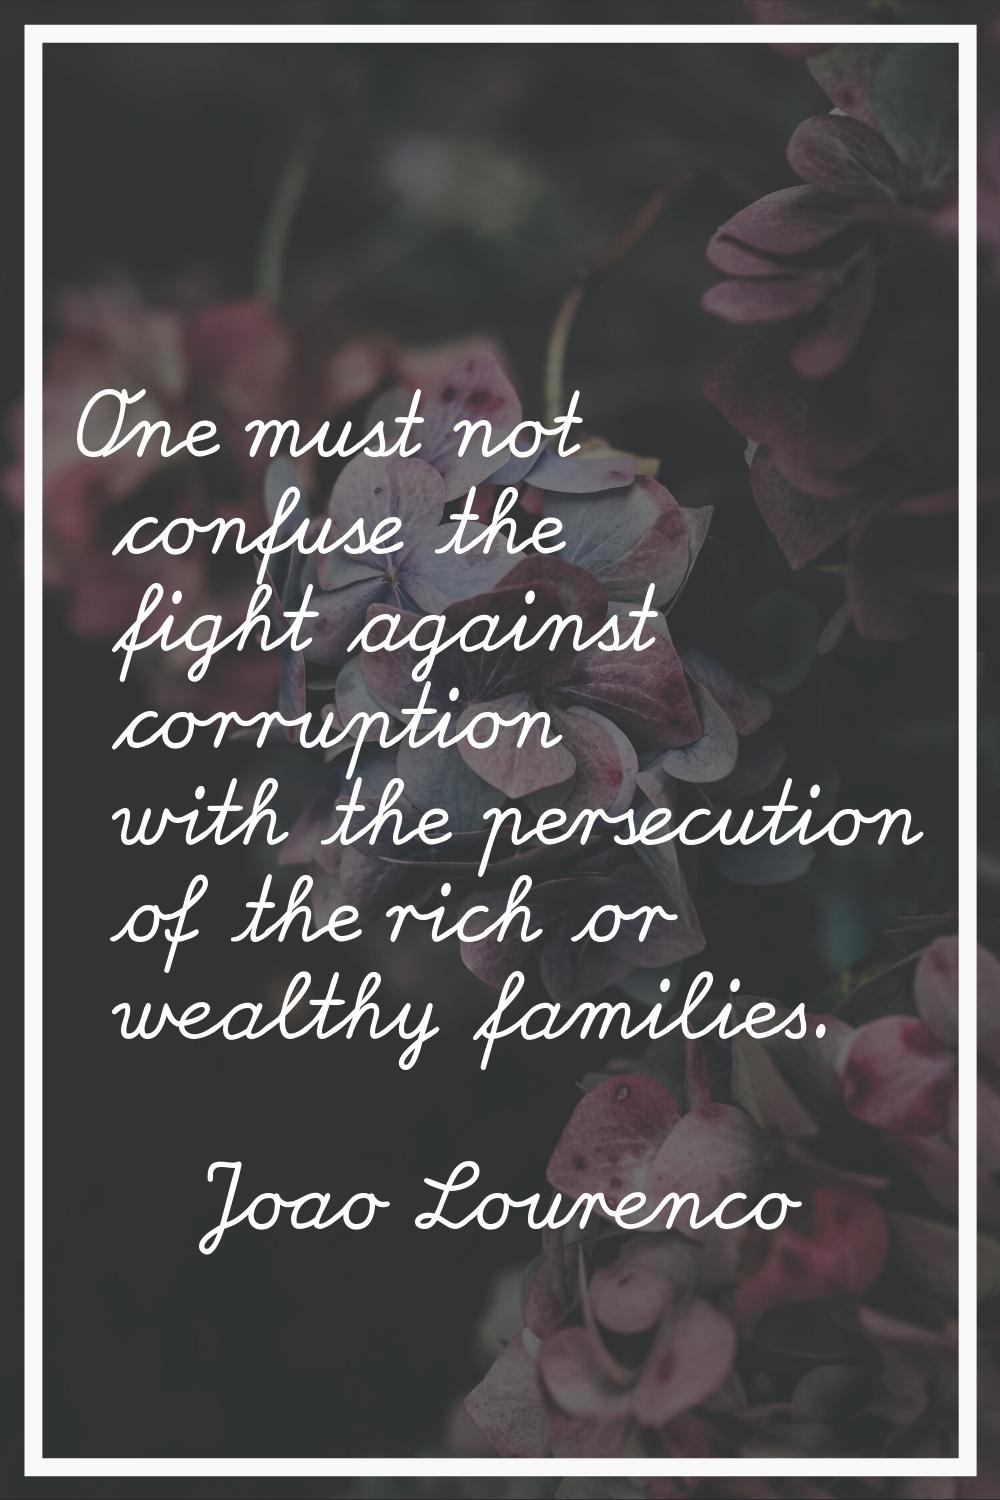 One must not confuse the fight against corruption with the persecution of the rich or wealthy famil